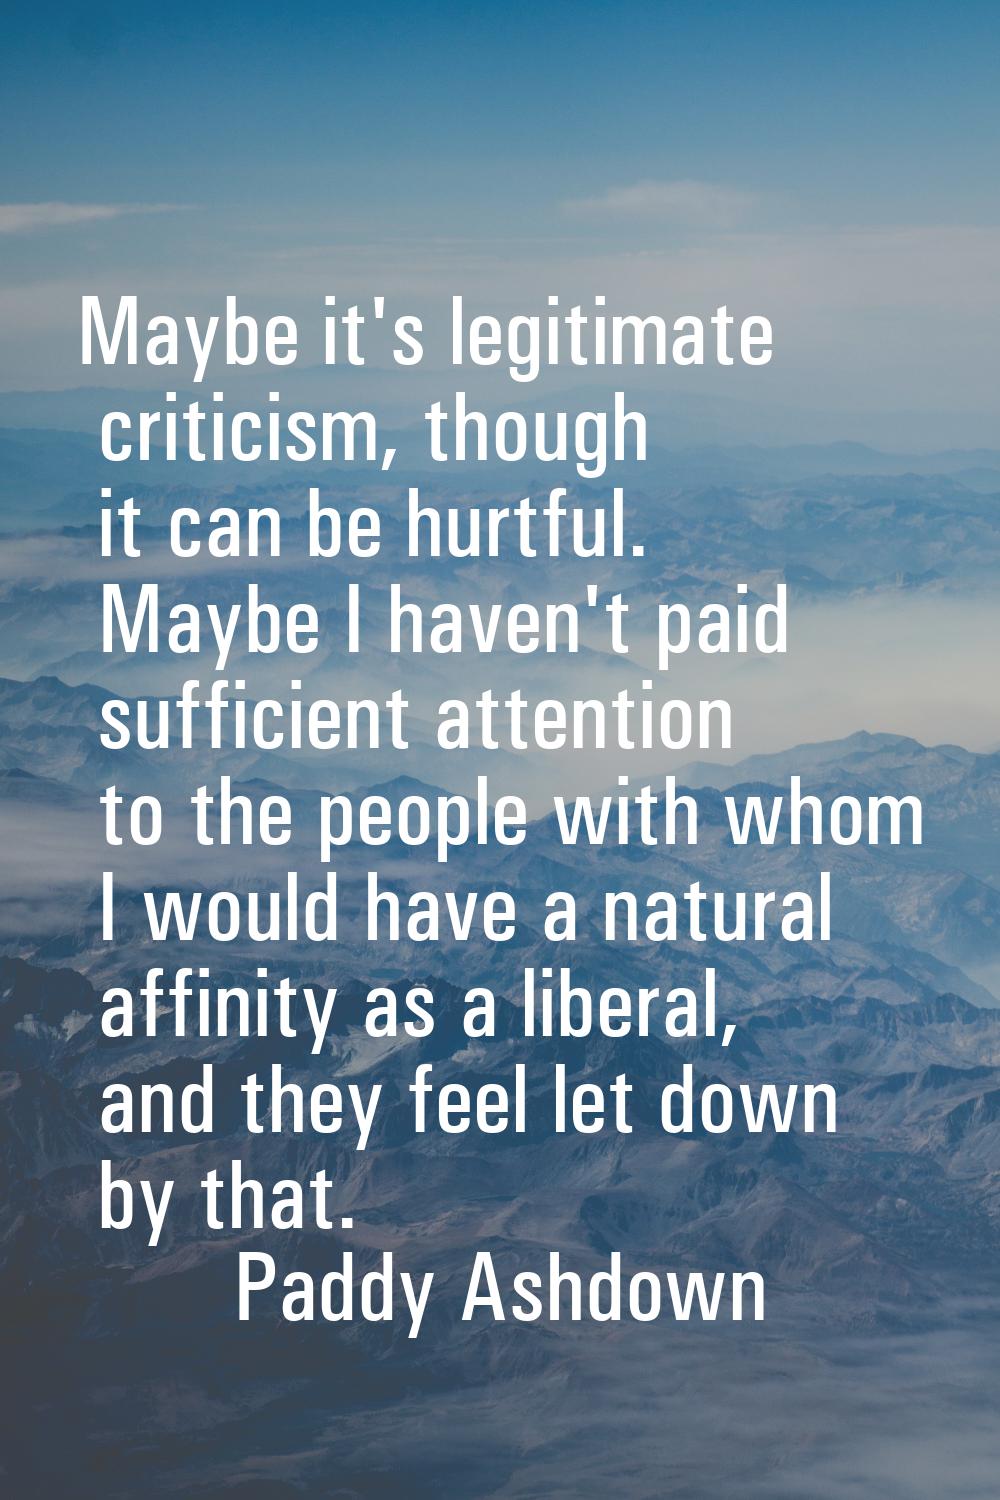 Maybe it's legitimate criticism, though it can be hurtful. Maybe I haven't paid sufficient attentio